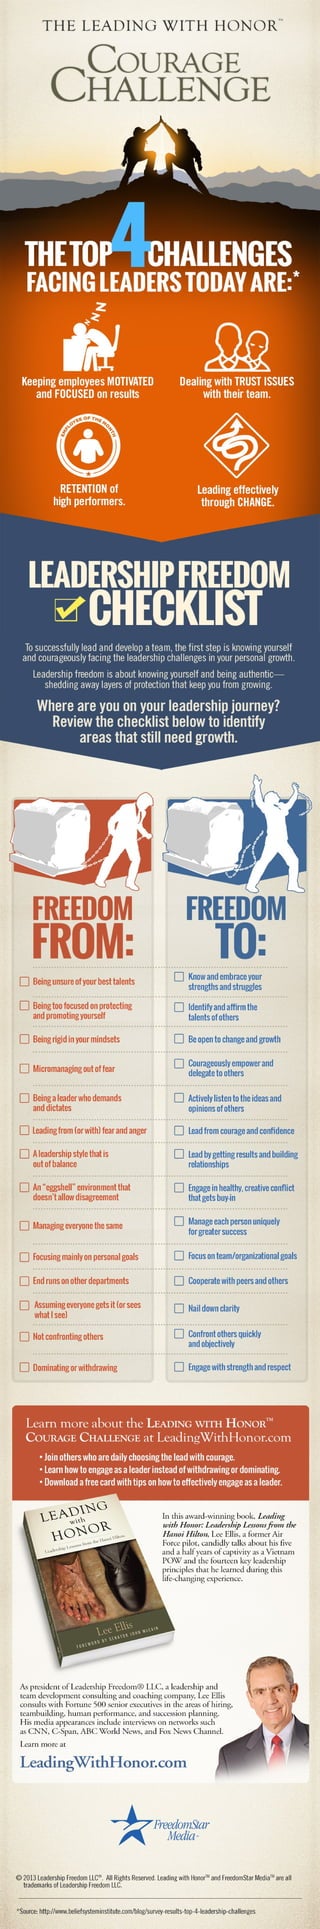 Leadership Freedom Checklist by Lee Ellis - Where Are You on The Journey?